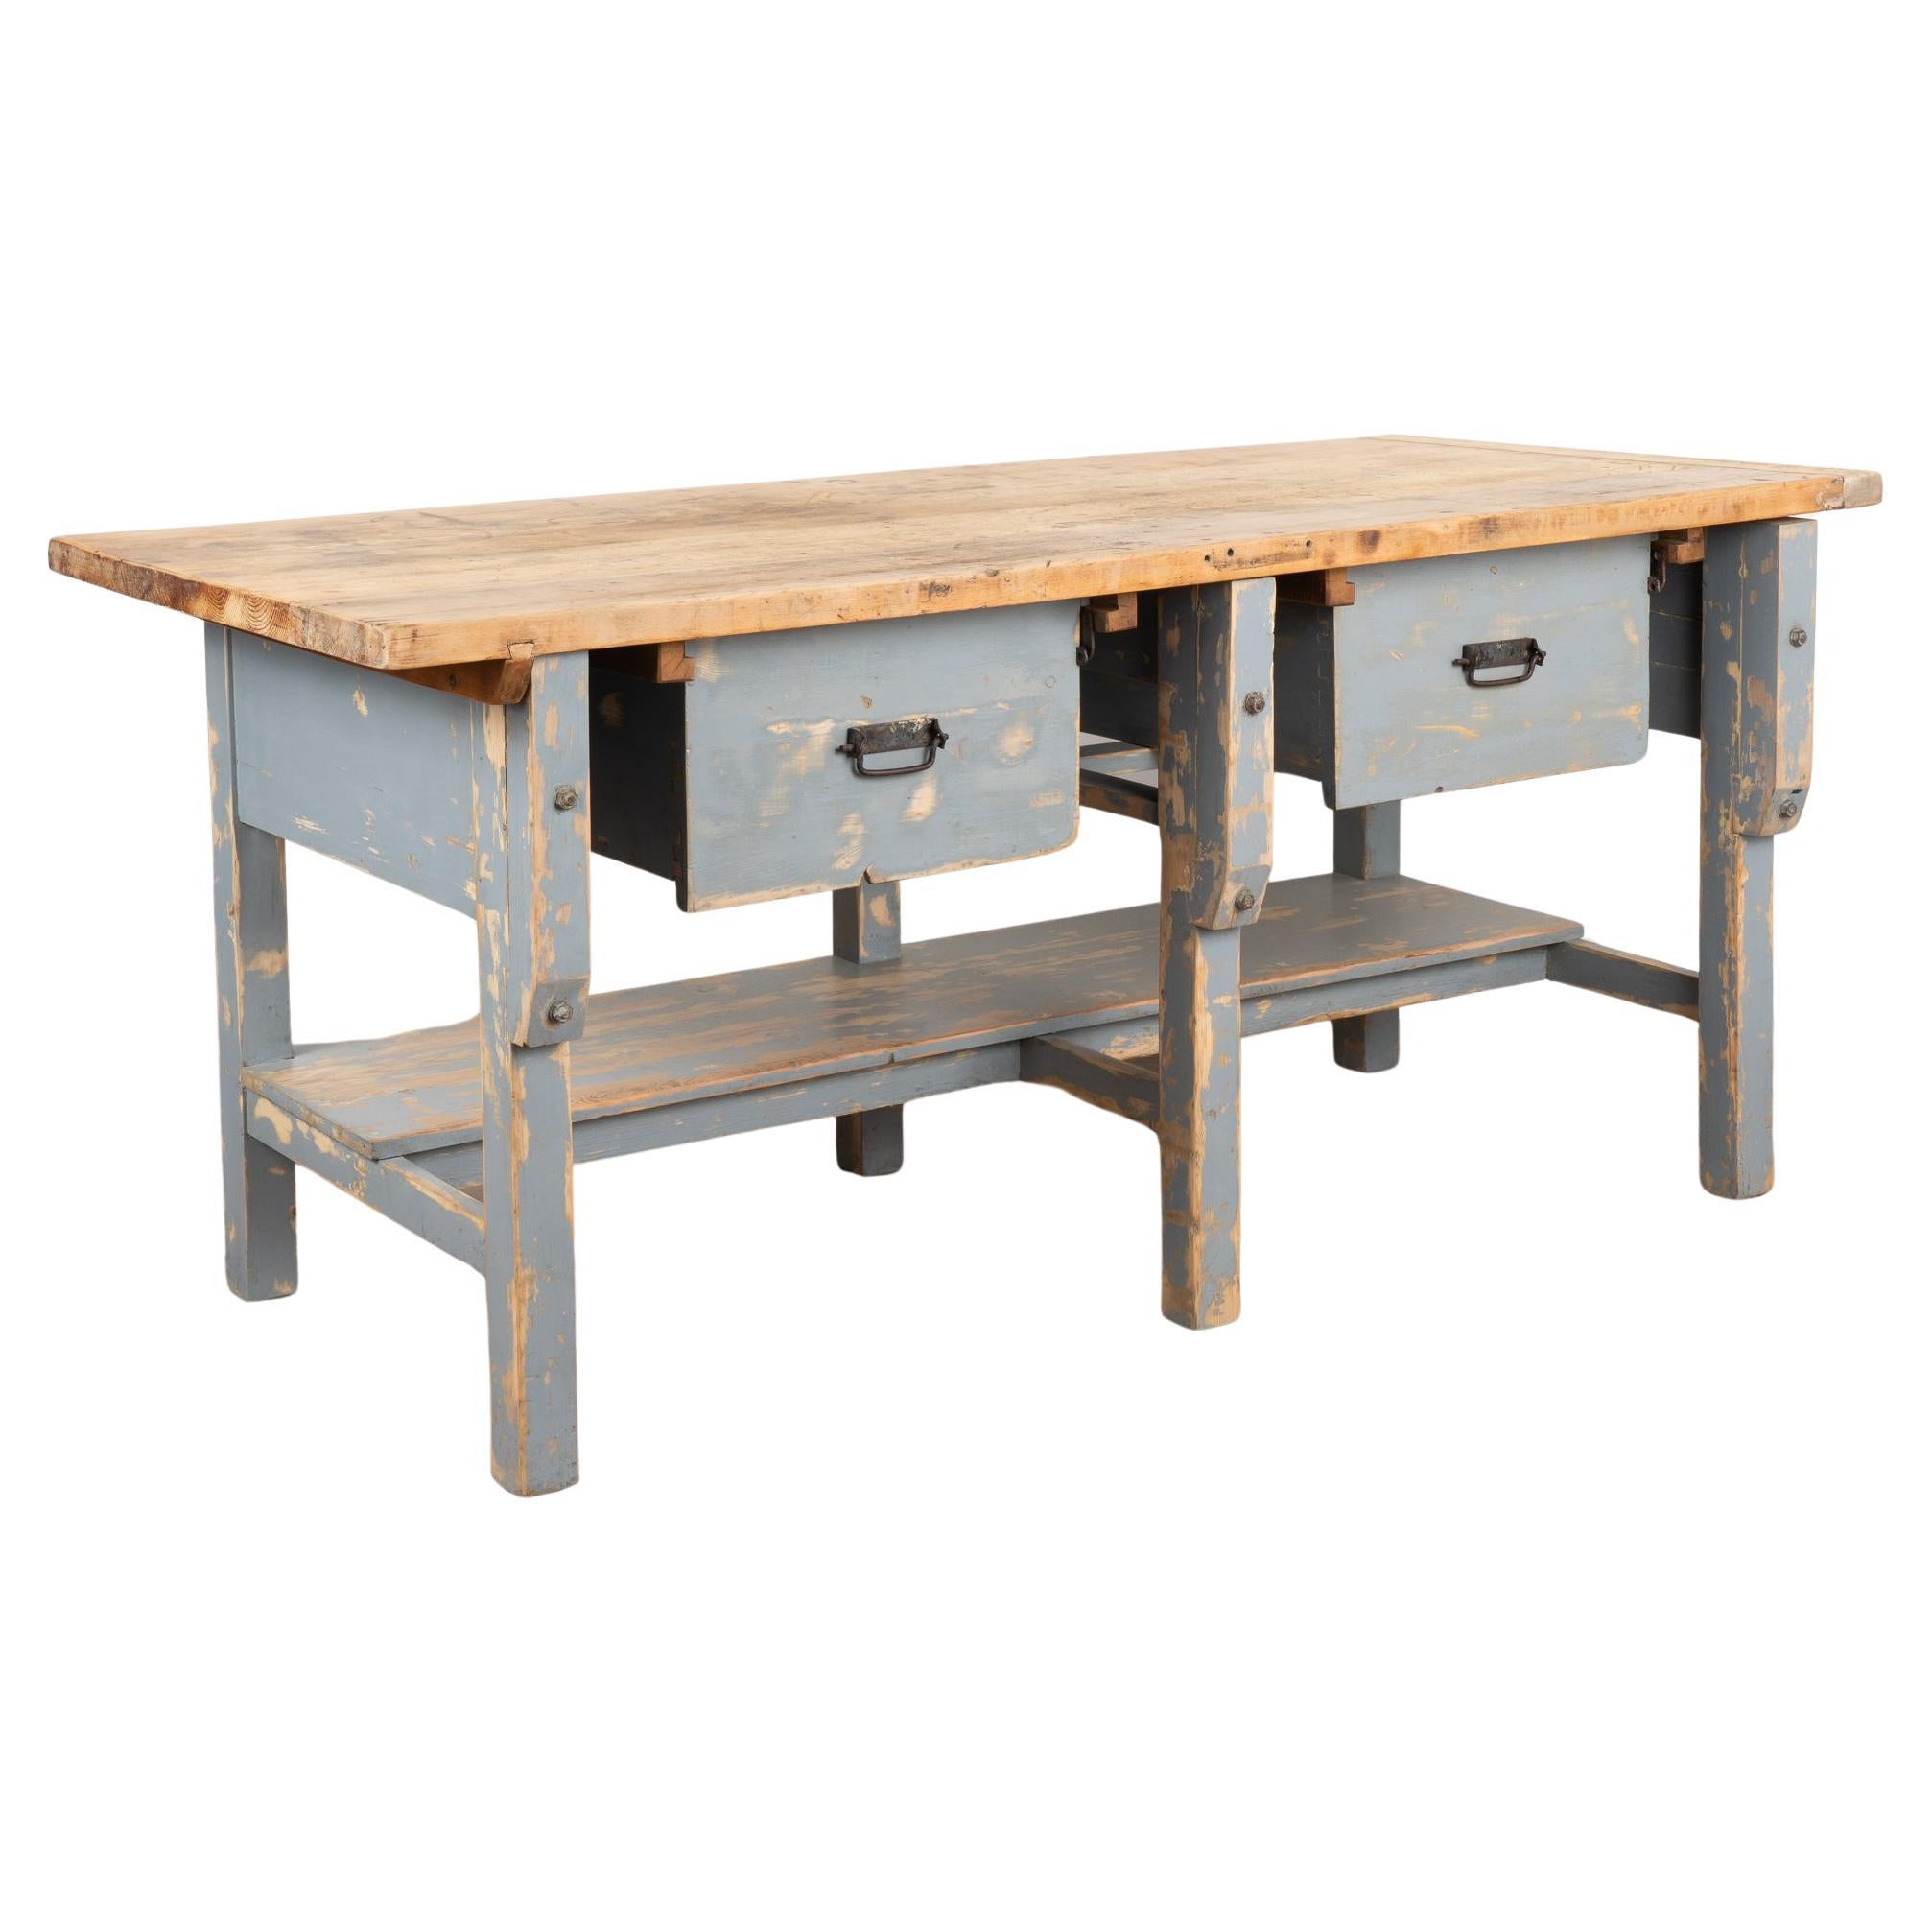 Large Blue Rustic Work Table Kitchen Island With 2 Drawers and Shelf, Circa 1890